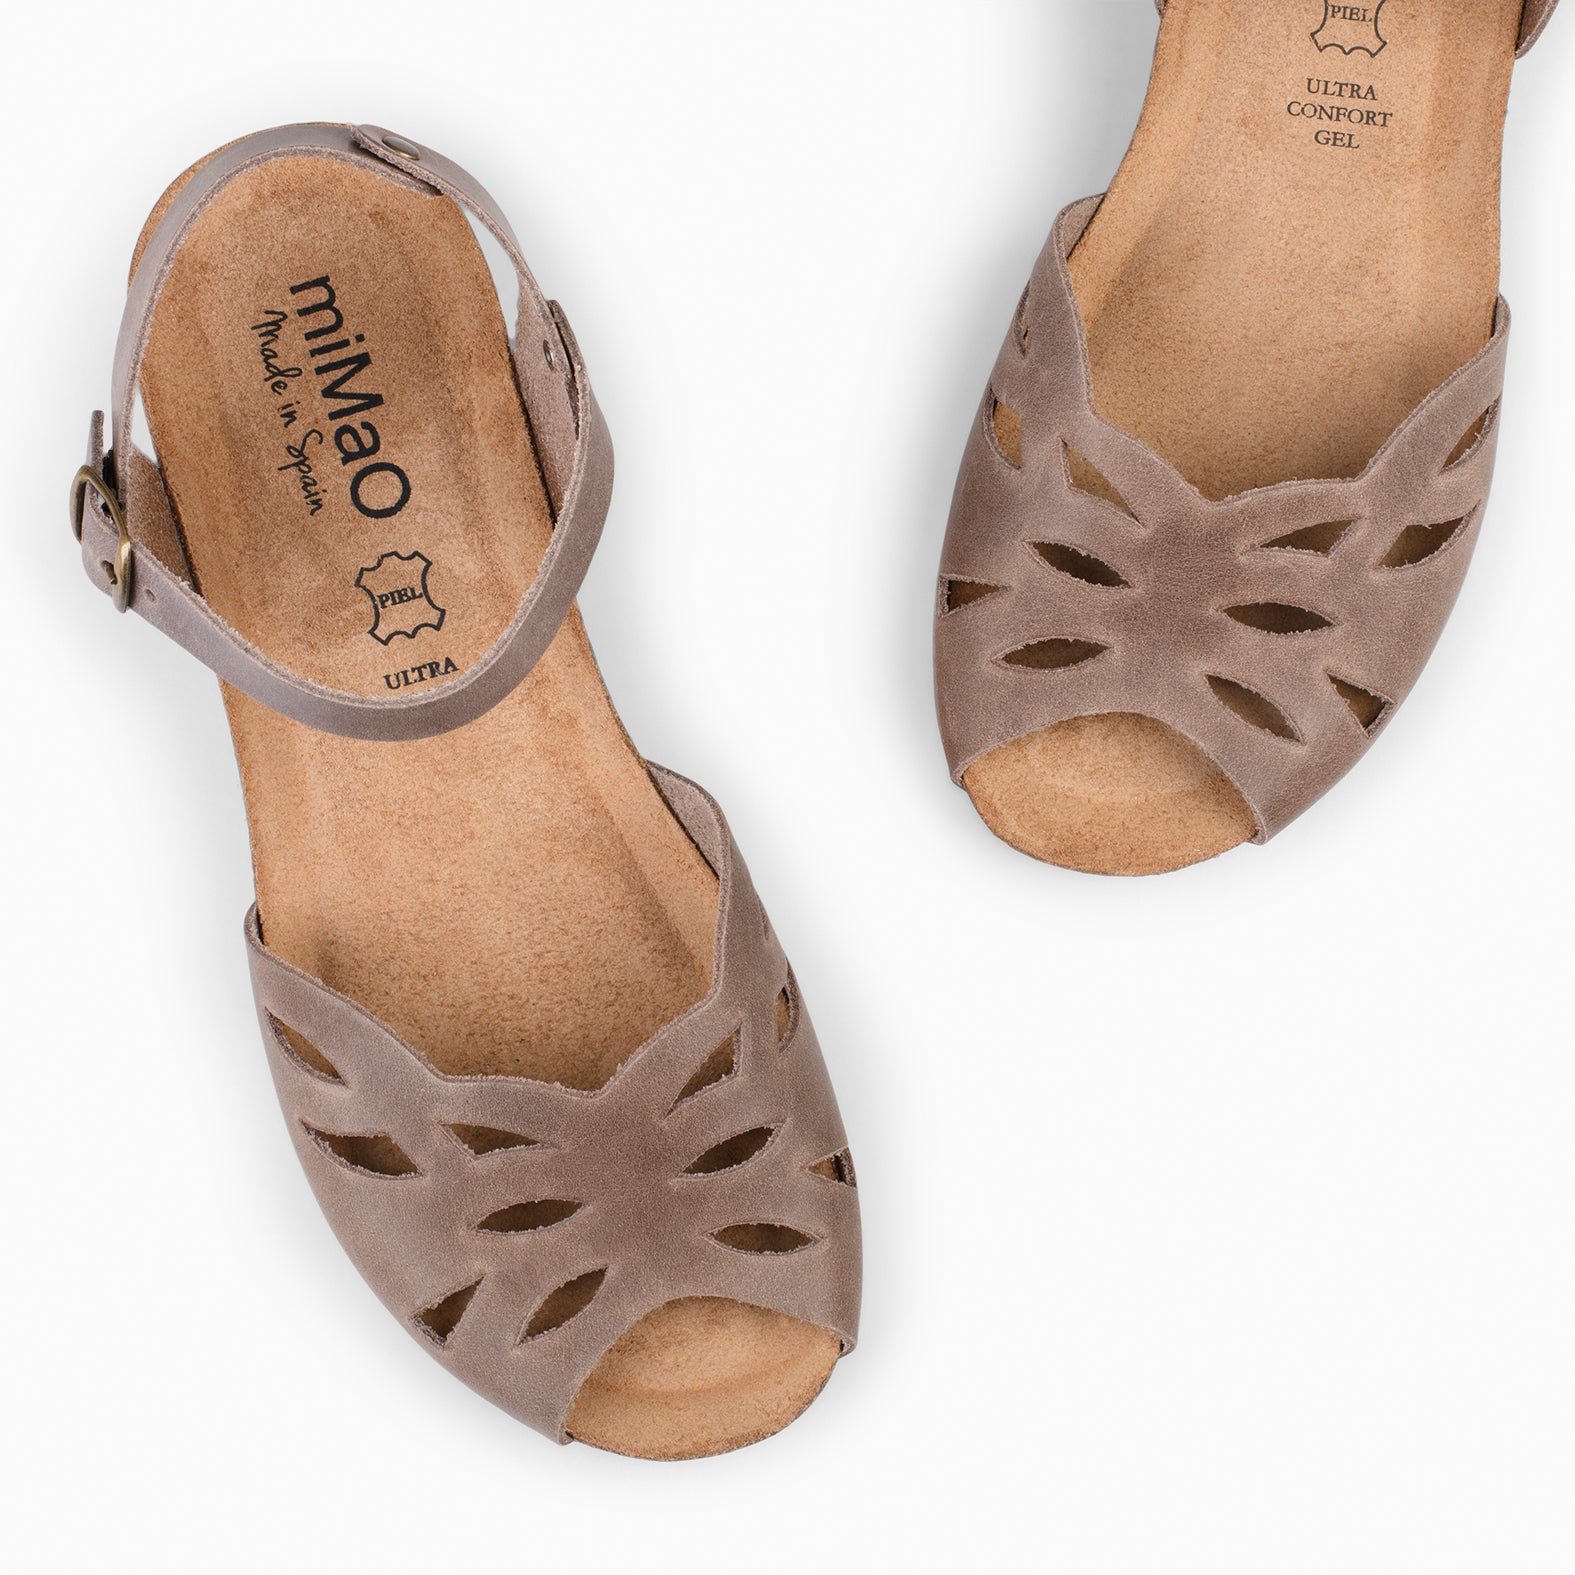 ALOE – TAUPE BIO sandals with wedge